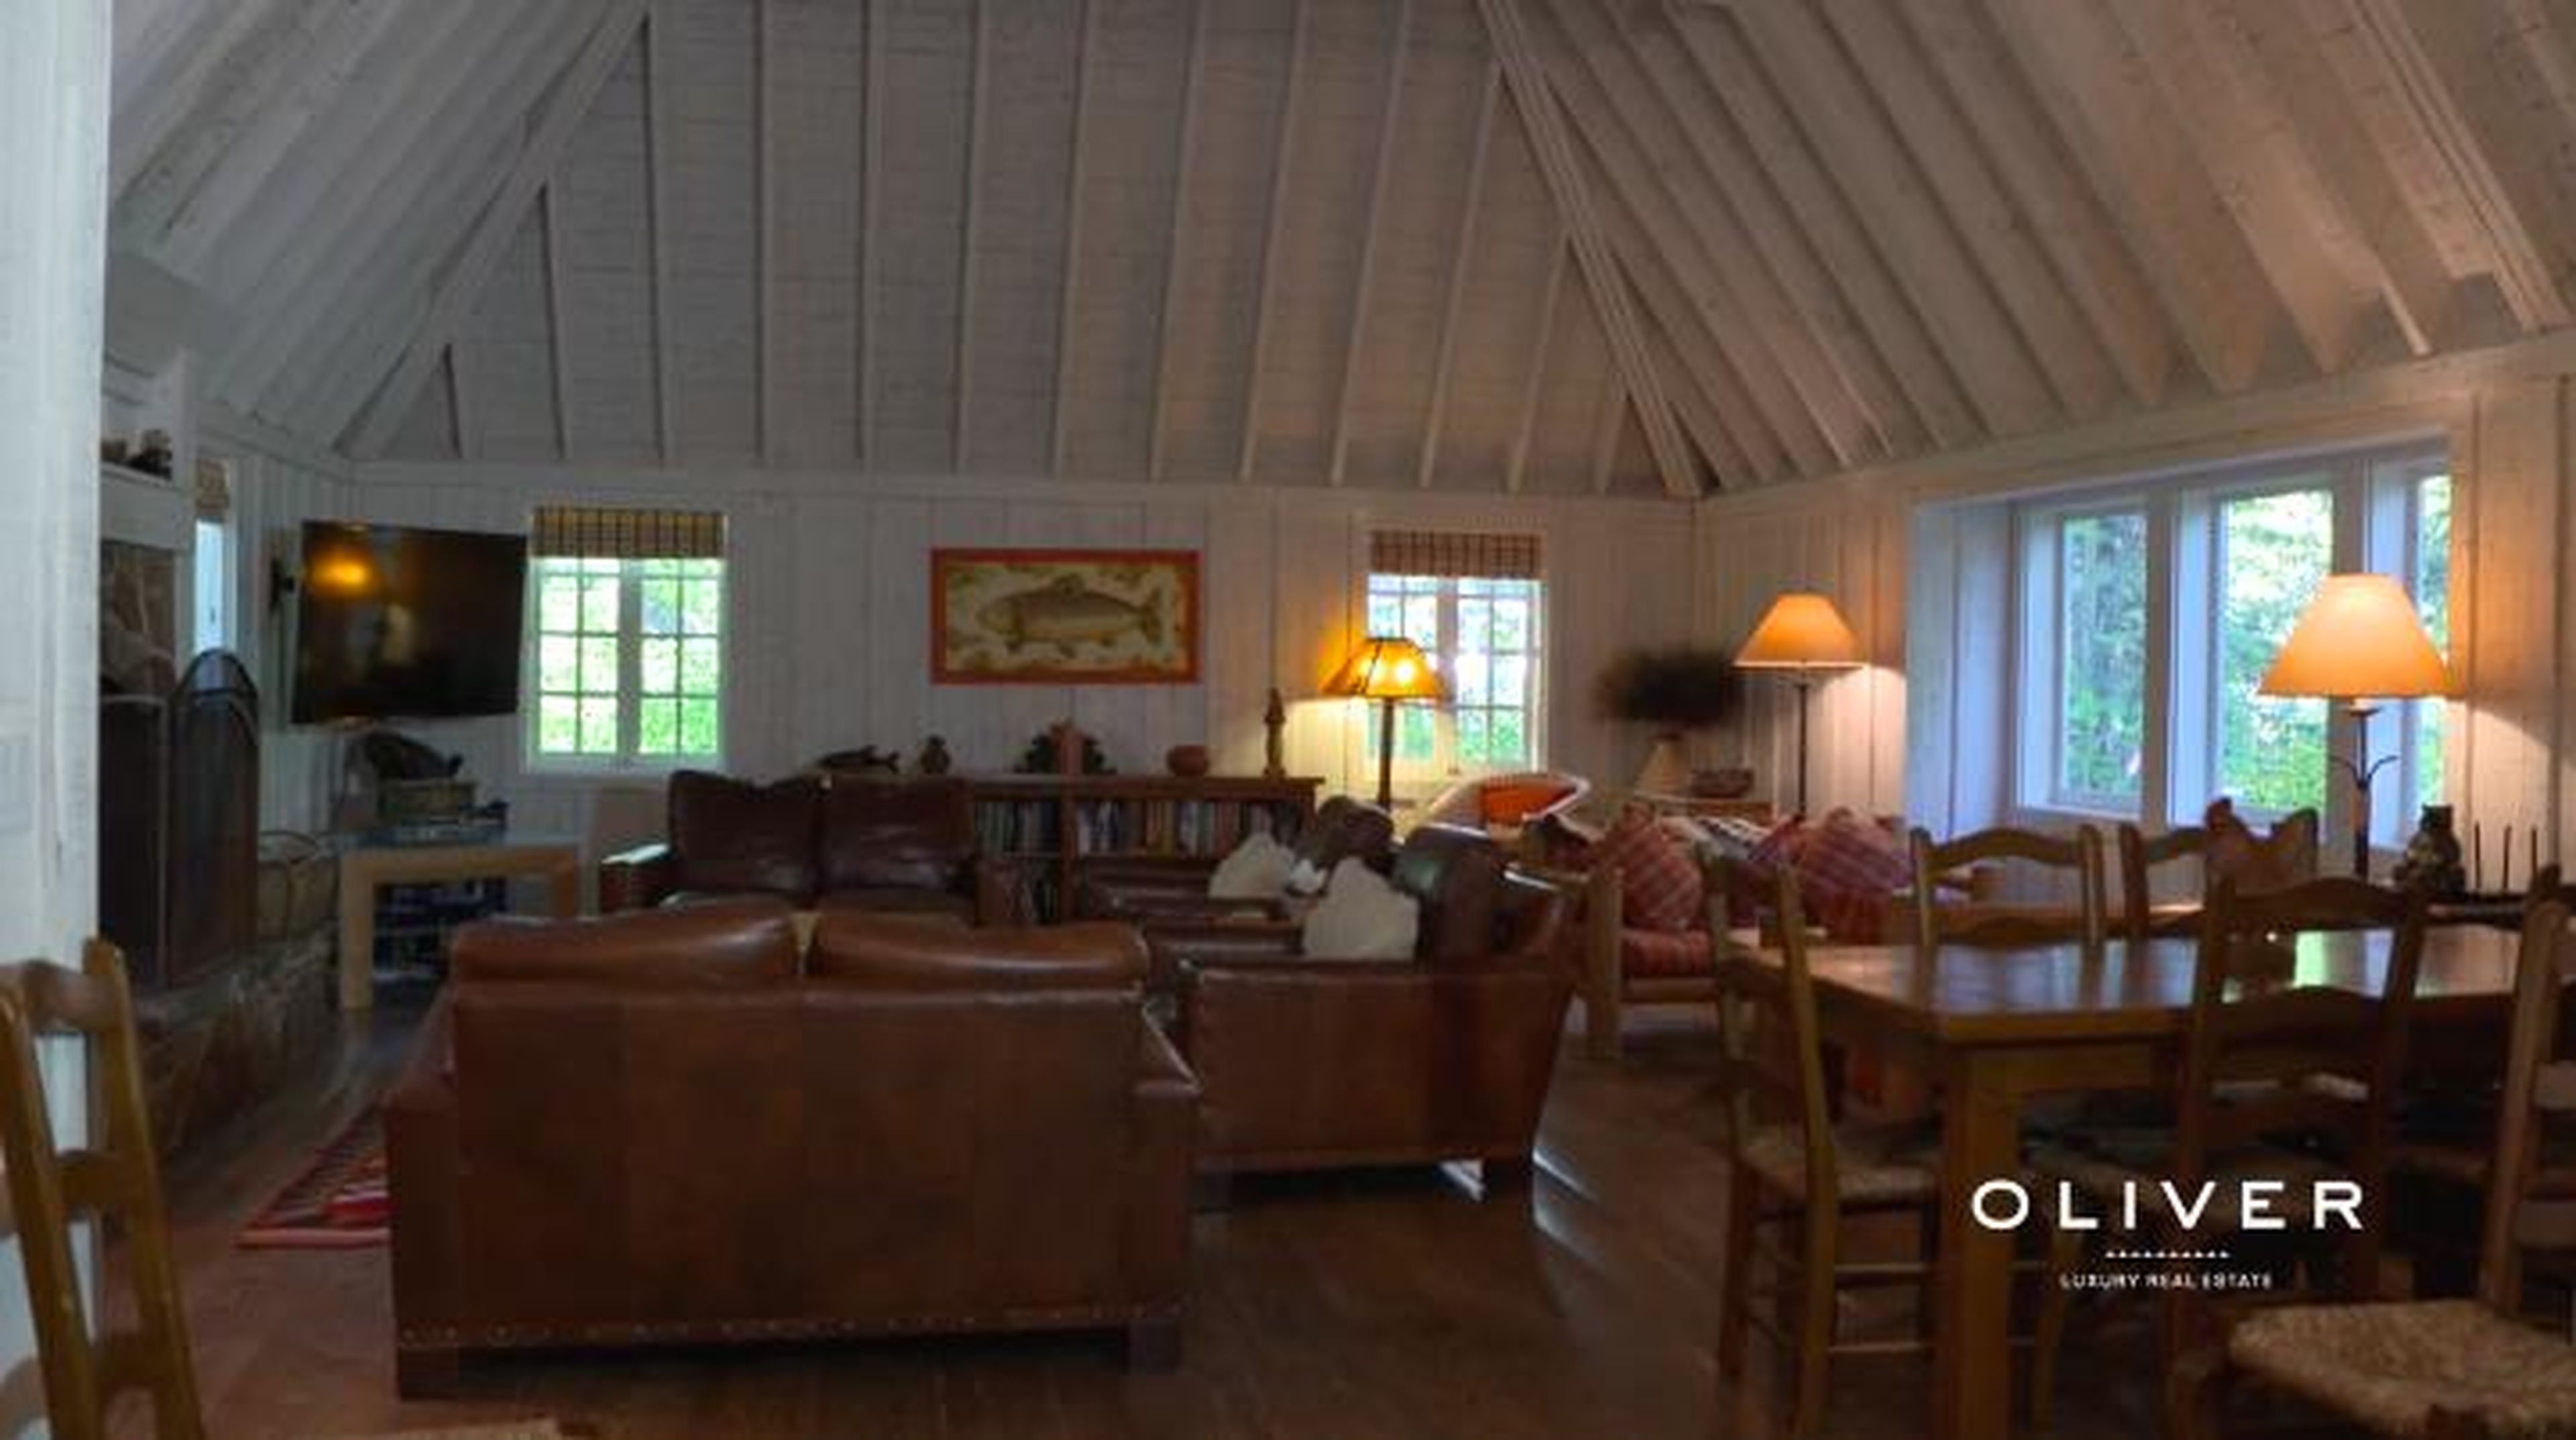 The main section of the house has a large living room with high ceilings and a wood-burning fireplace — a nice place to lounge after a long day at the lake or in the winter, after skiing on the nearby slopes.